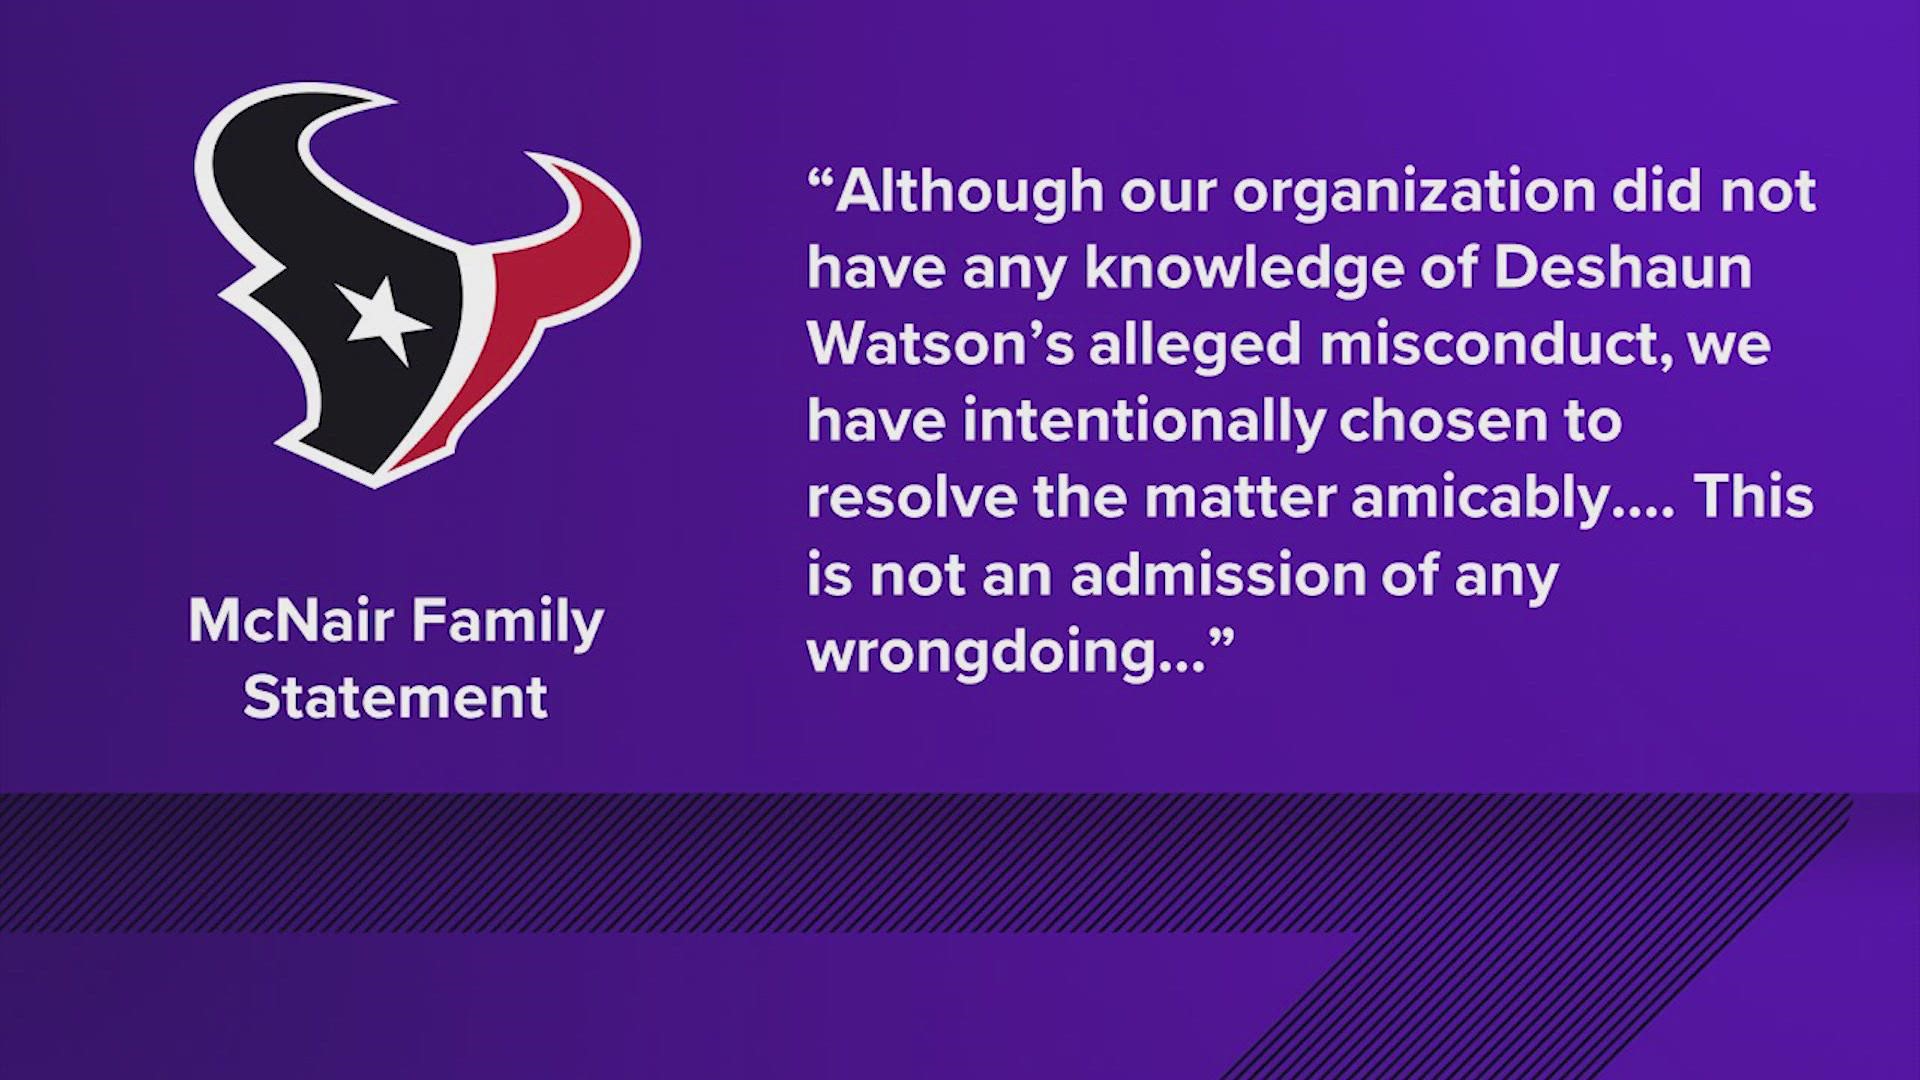 The Houston Texans have settled with 30 women who accused former quarterback Deshaun Watson of sexual misconduct.